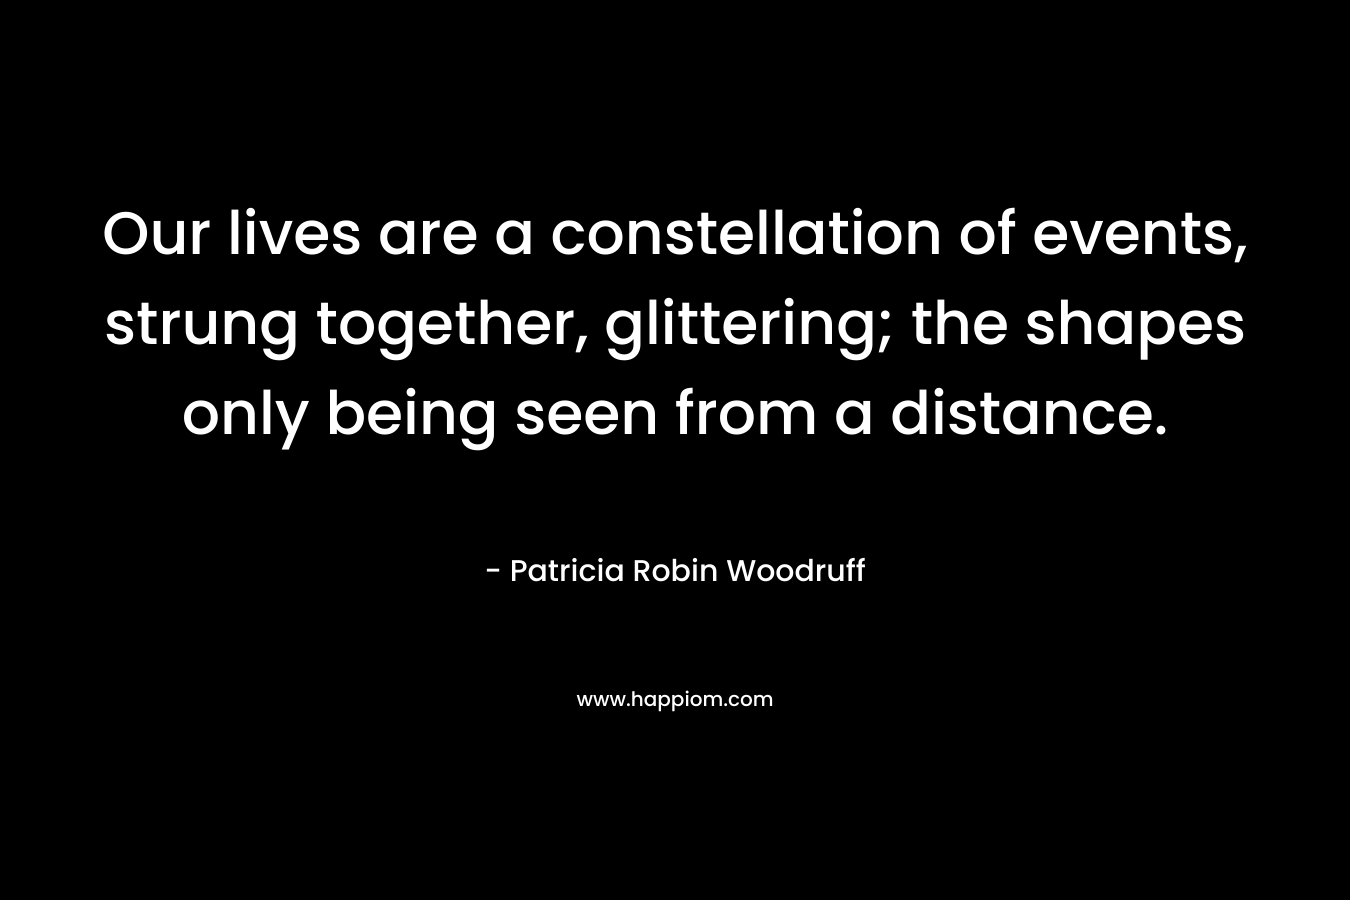 Our lives are a constellation of events, strung together, glittering; the shapes only being seen from a distance. – Patricia Robin Woodruff